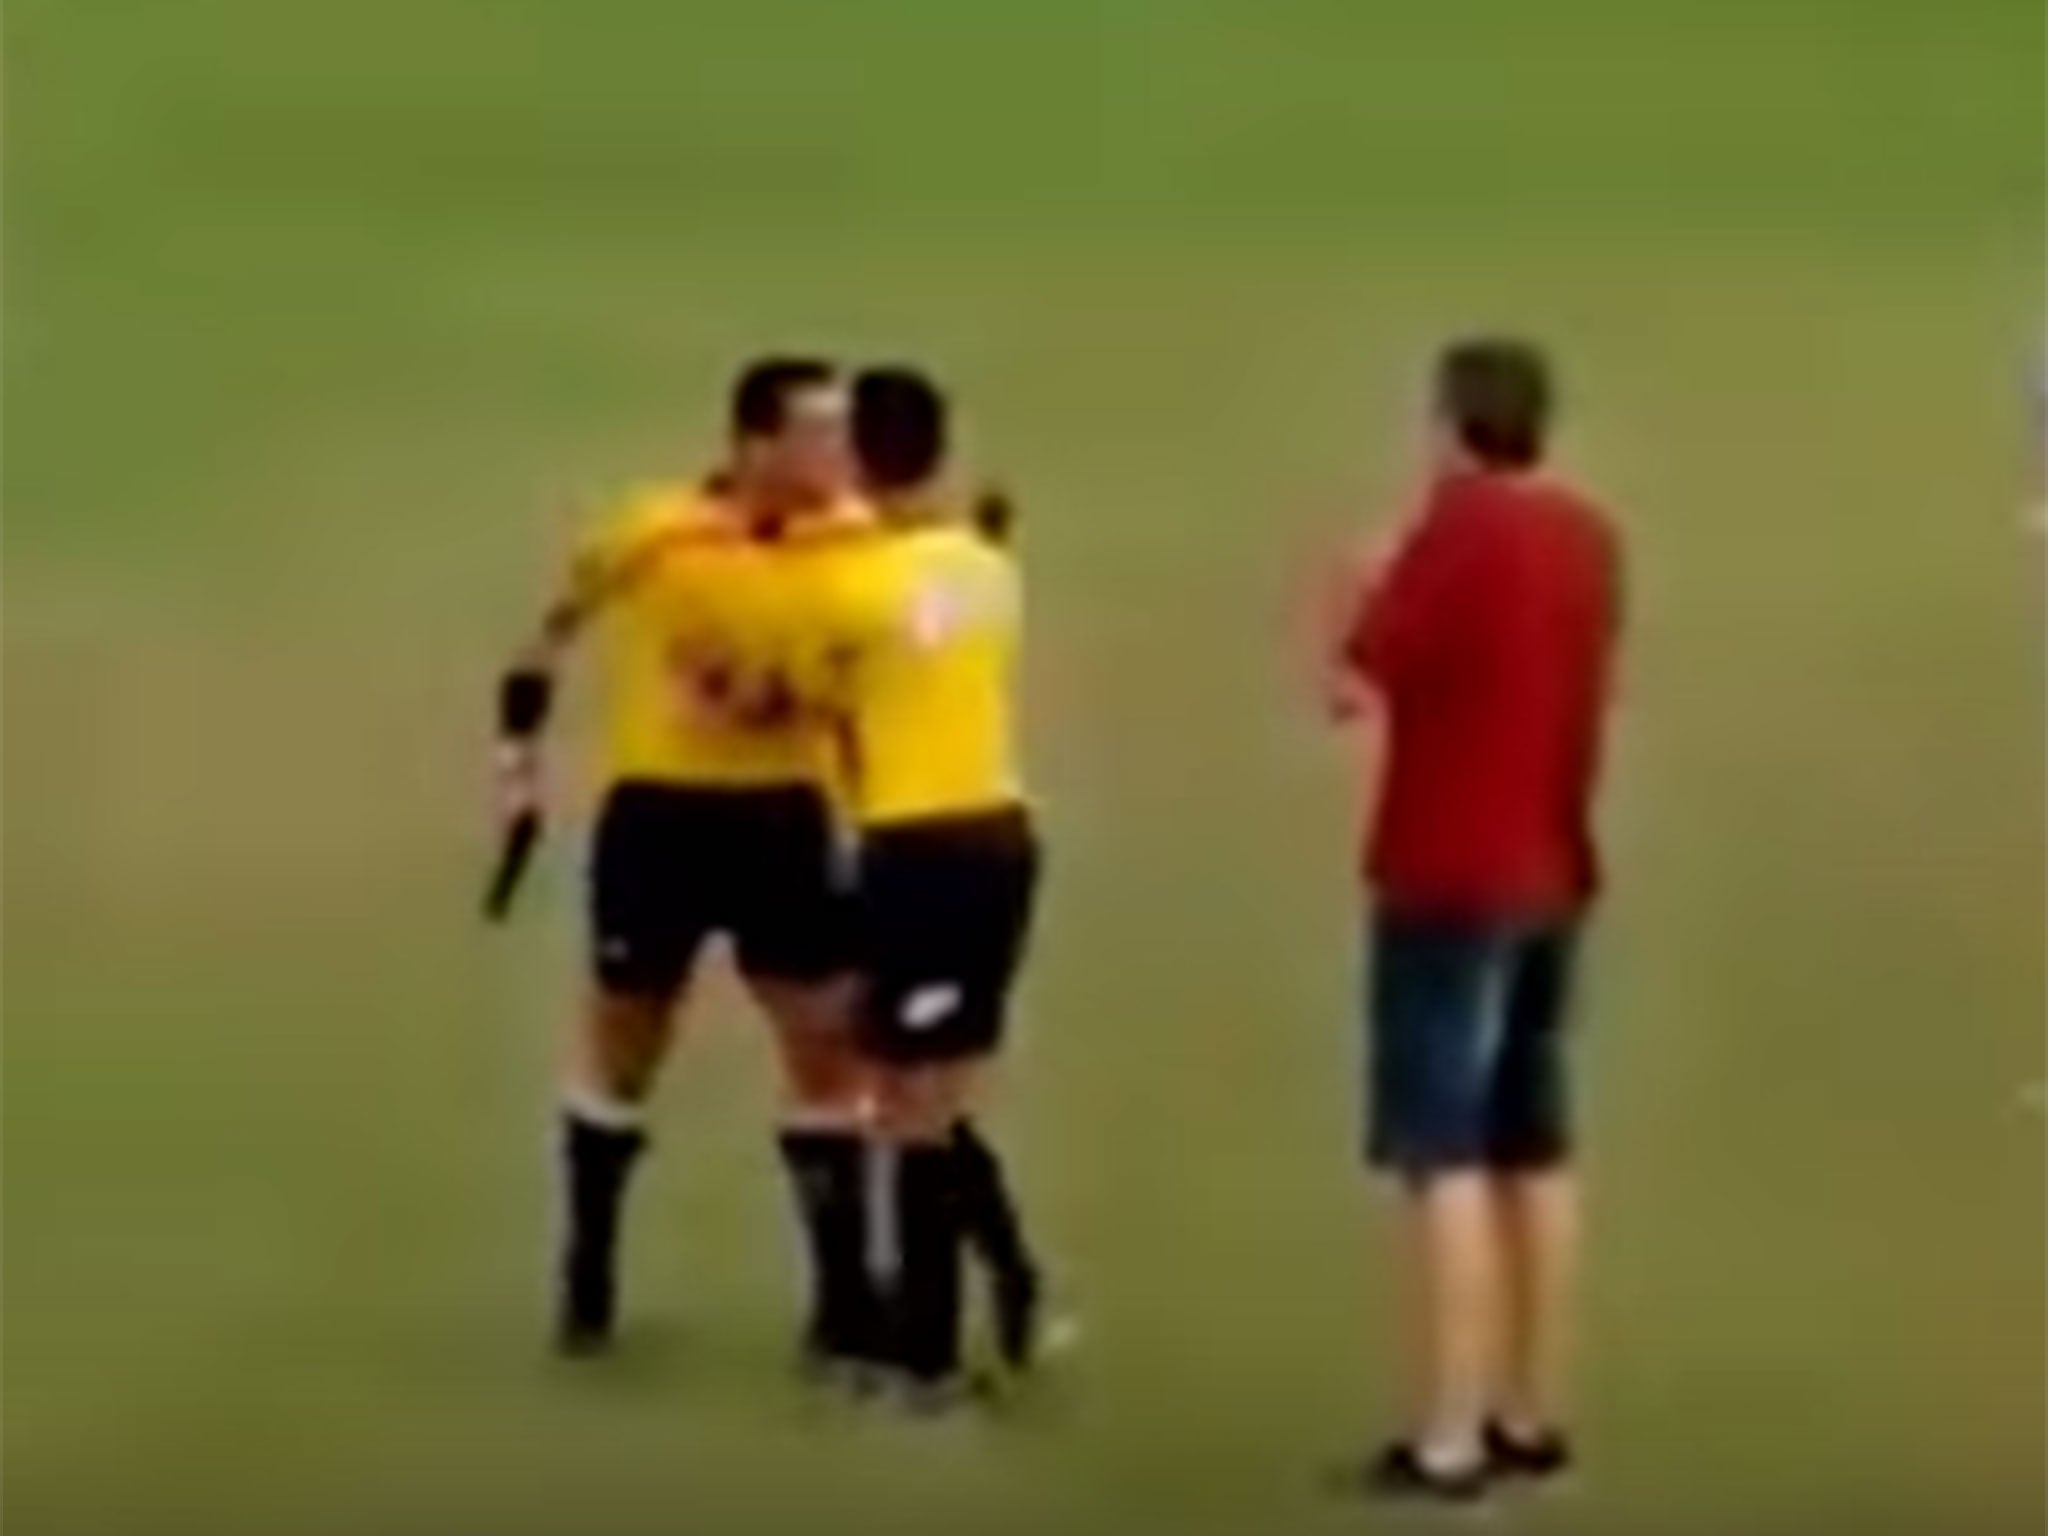 Referee Receives Support After Pulling Gun Out On The Pitch The Independent The Independent